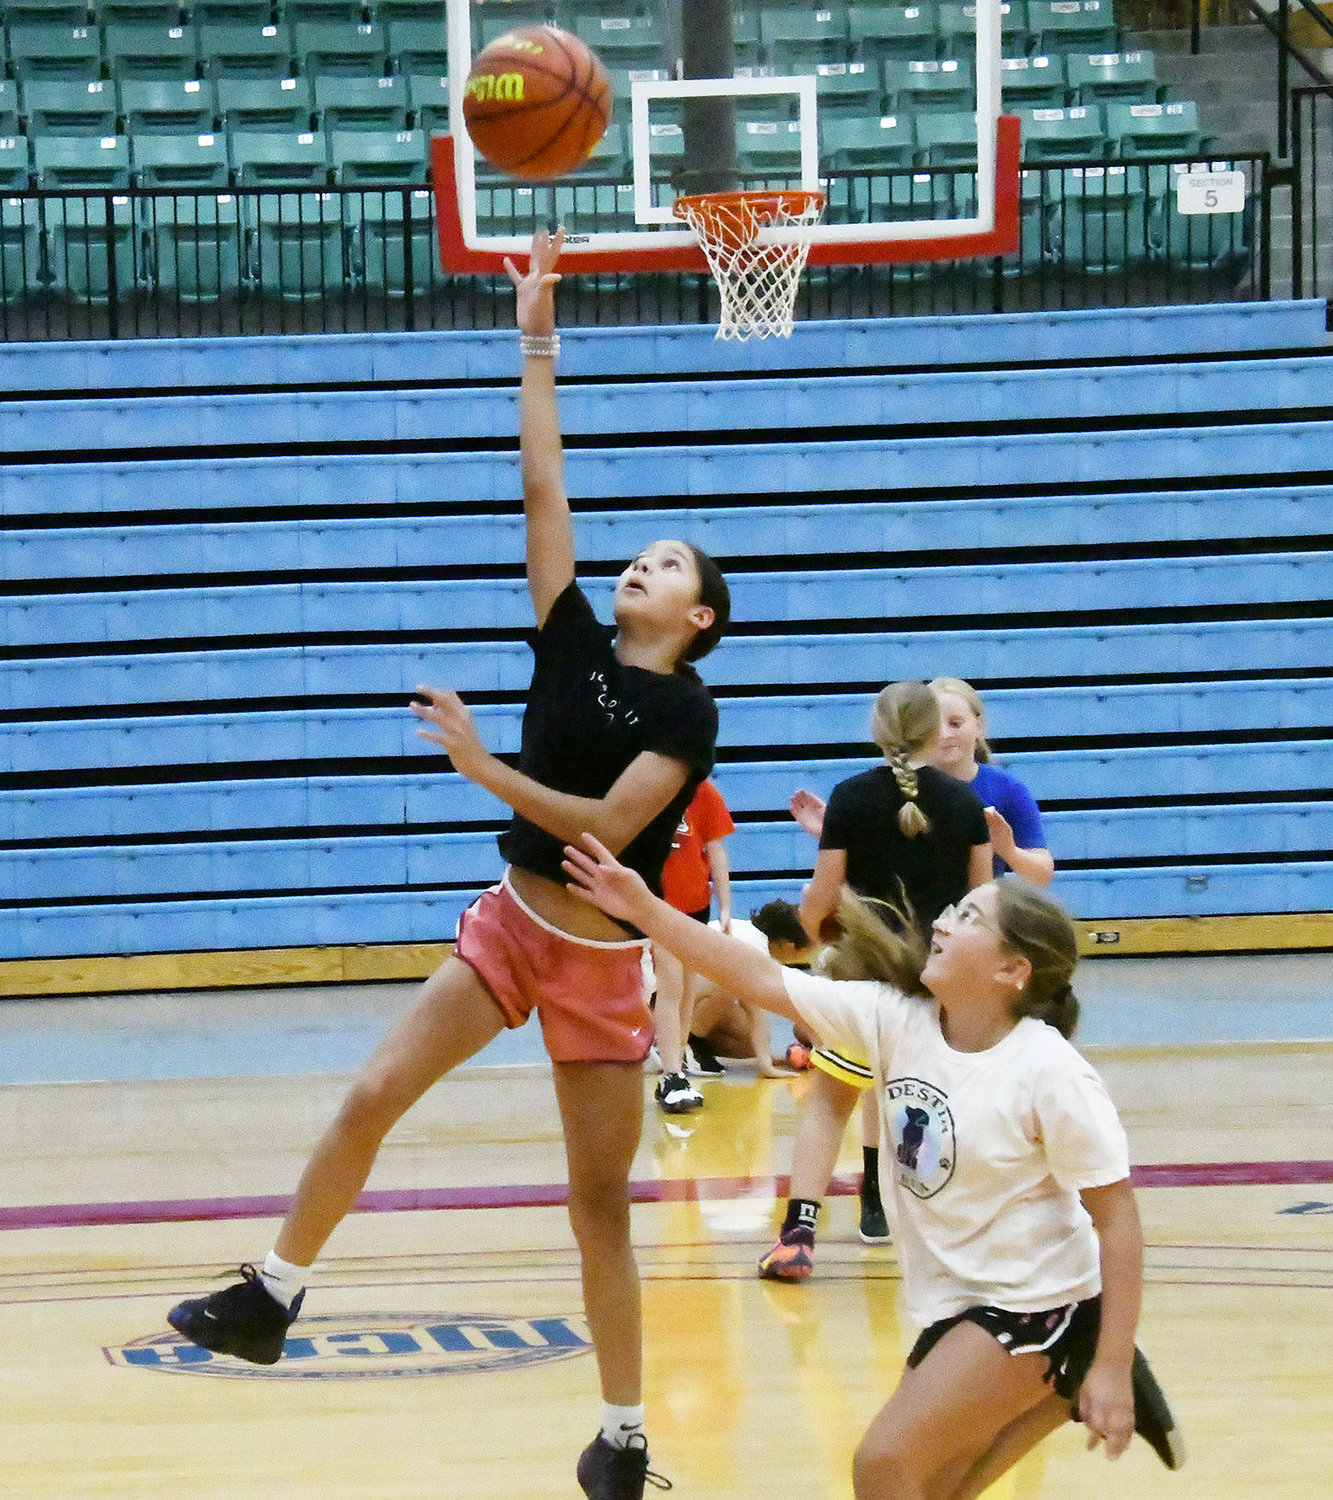 Arionna Rucker leaps into the air while attempting a layup during a one-on-one game.